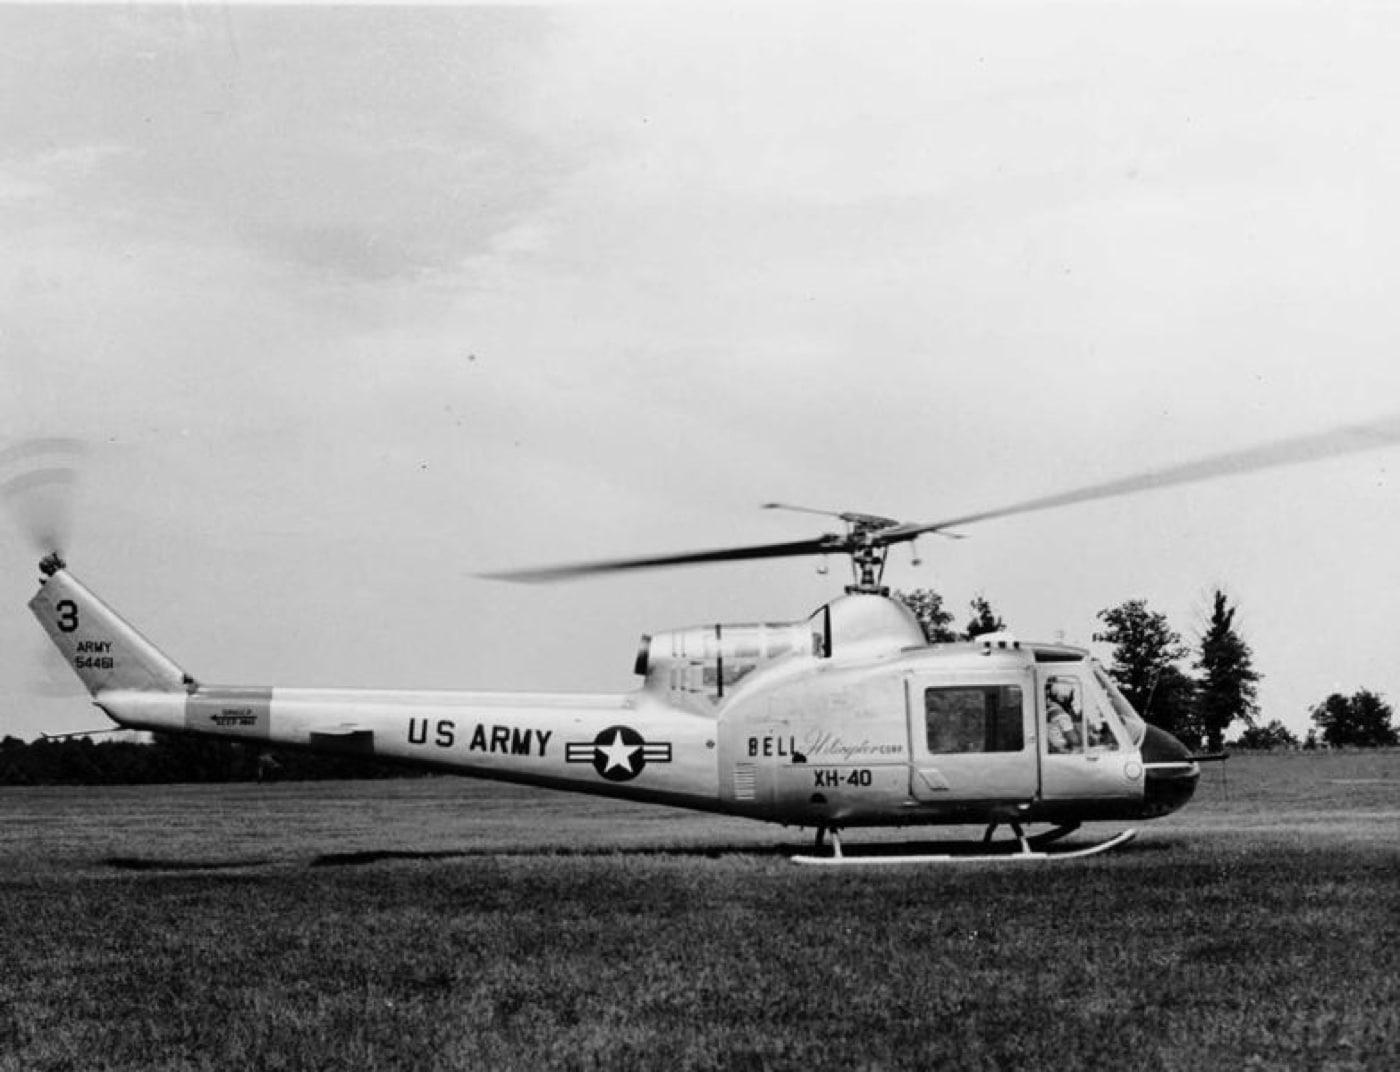 Shown in this photograph is the original XH-40 prototype helicopter. It was the first of the Bell UH-1 series. Named the Iroquois, the Huey nickname was started by Allied forces in Vietnam. The first helicopter battalion was part of a new medical evacuation unit. The helicopters could fit up to 6 stretchers when it entered service.